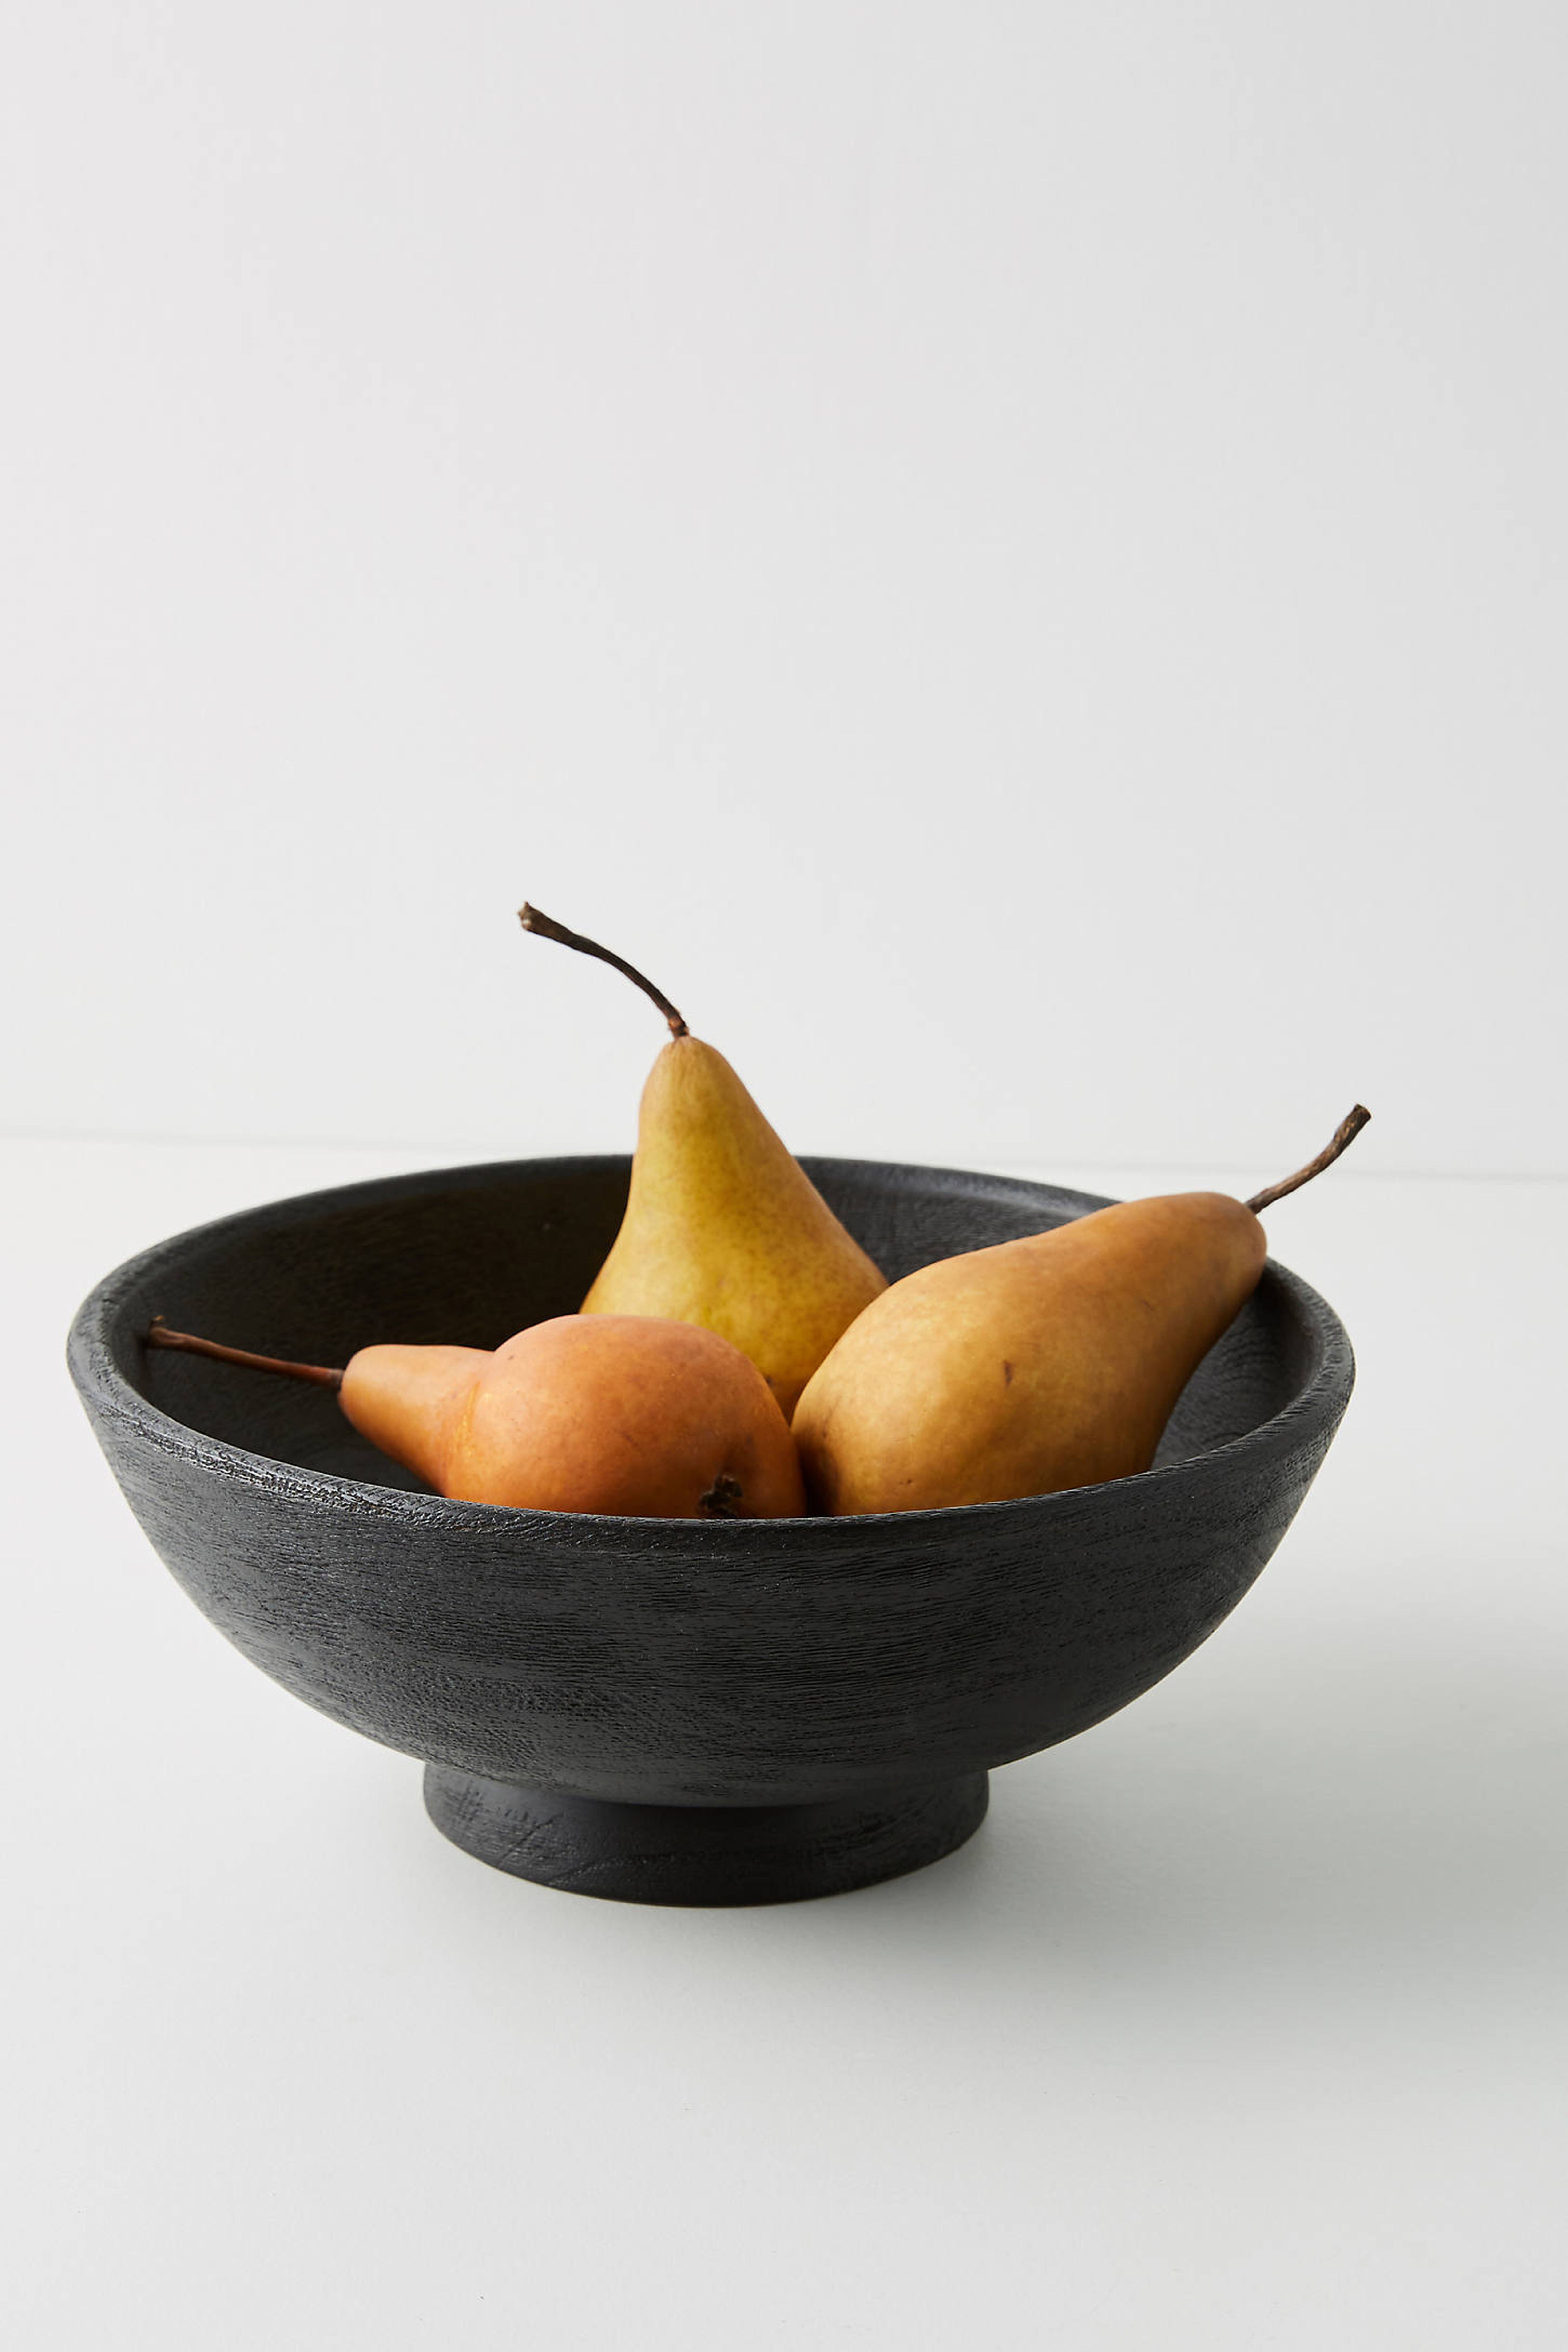 Ayla Decorative Bowl By Anthropologie in Black - Anthropologie